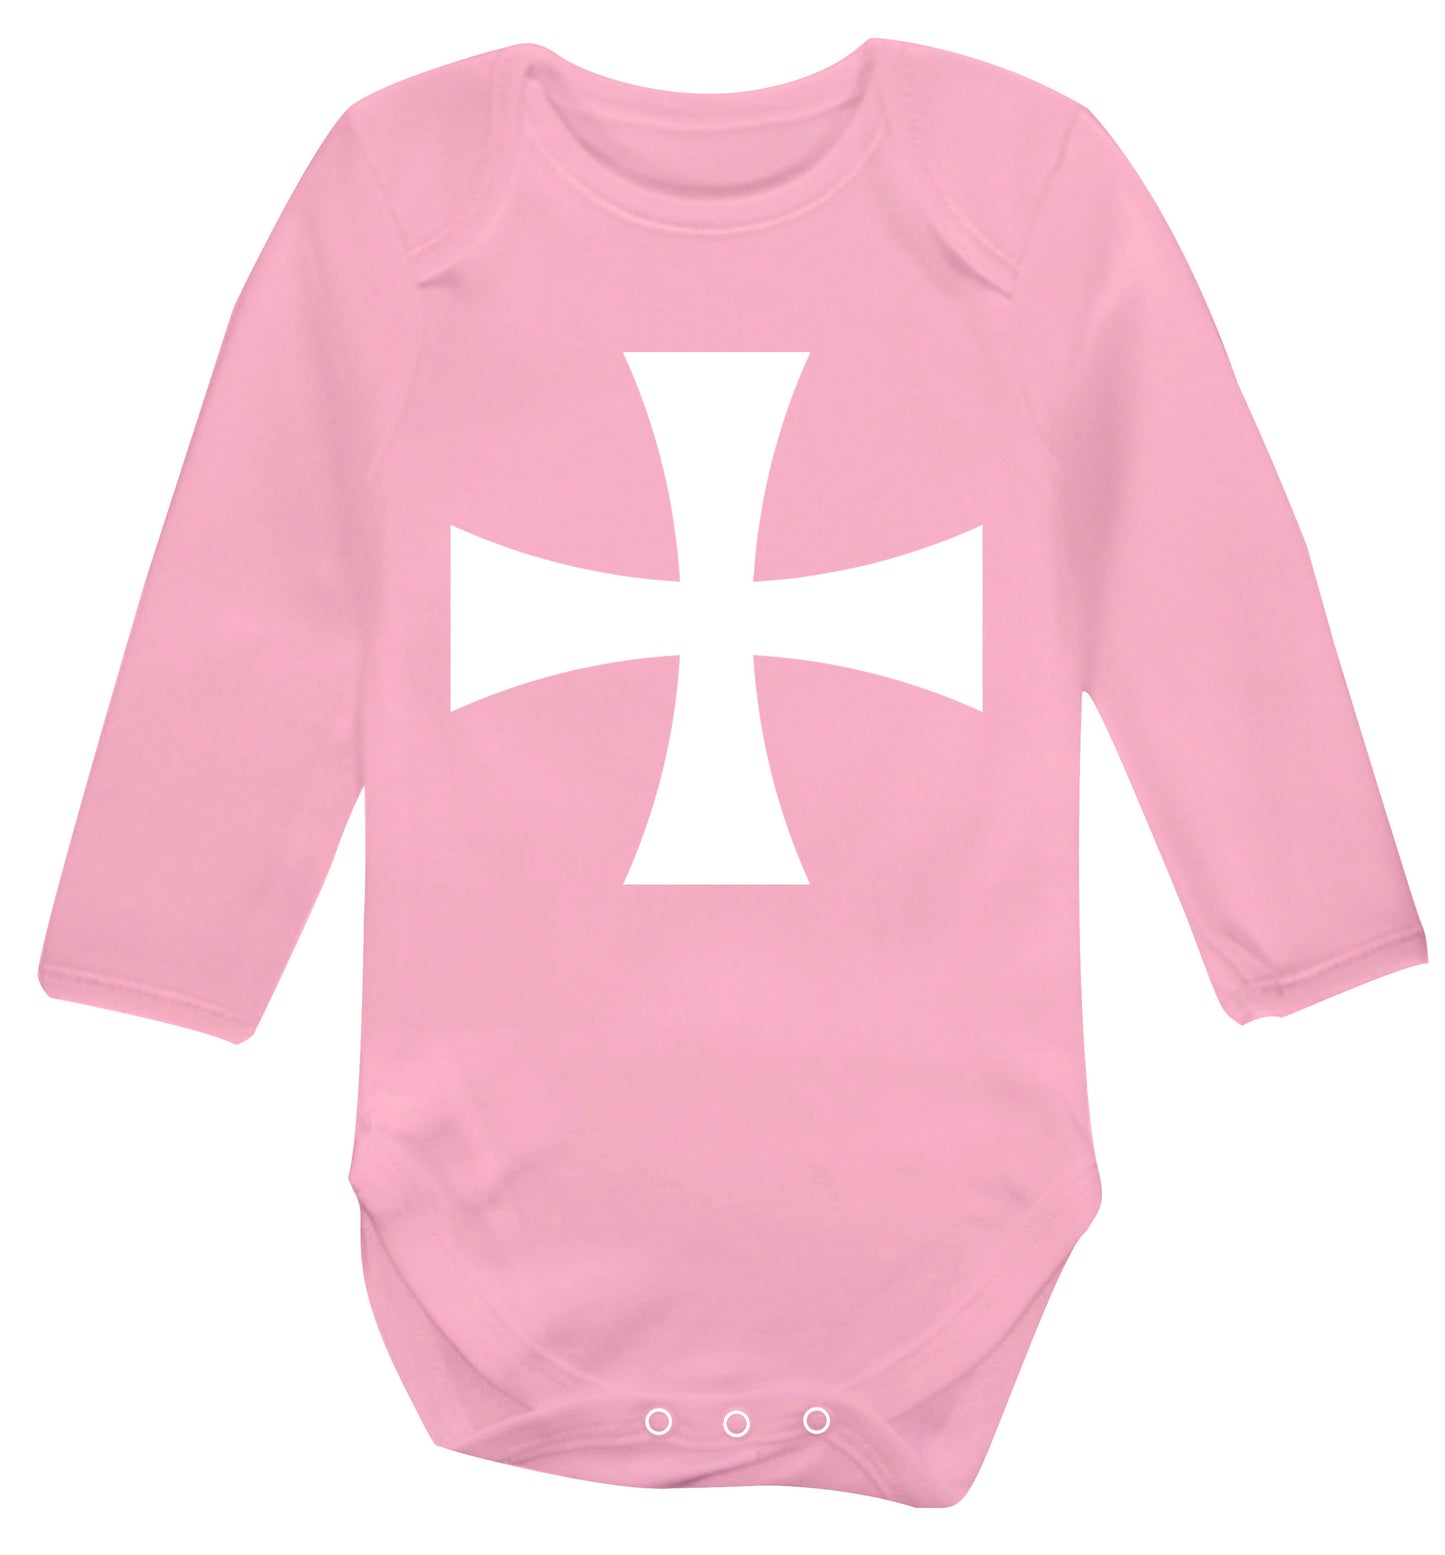 Knights Templar cross Baby Vest long sleeved pale pink 6-12 months